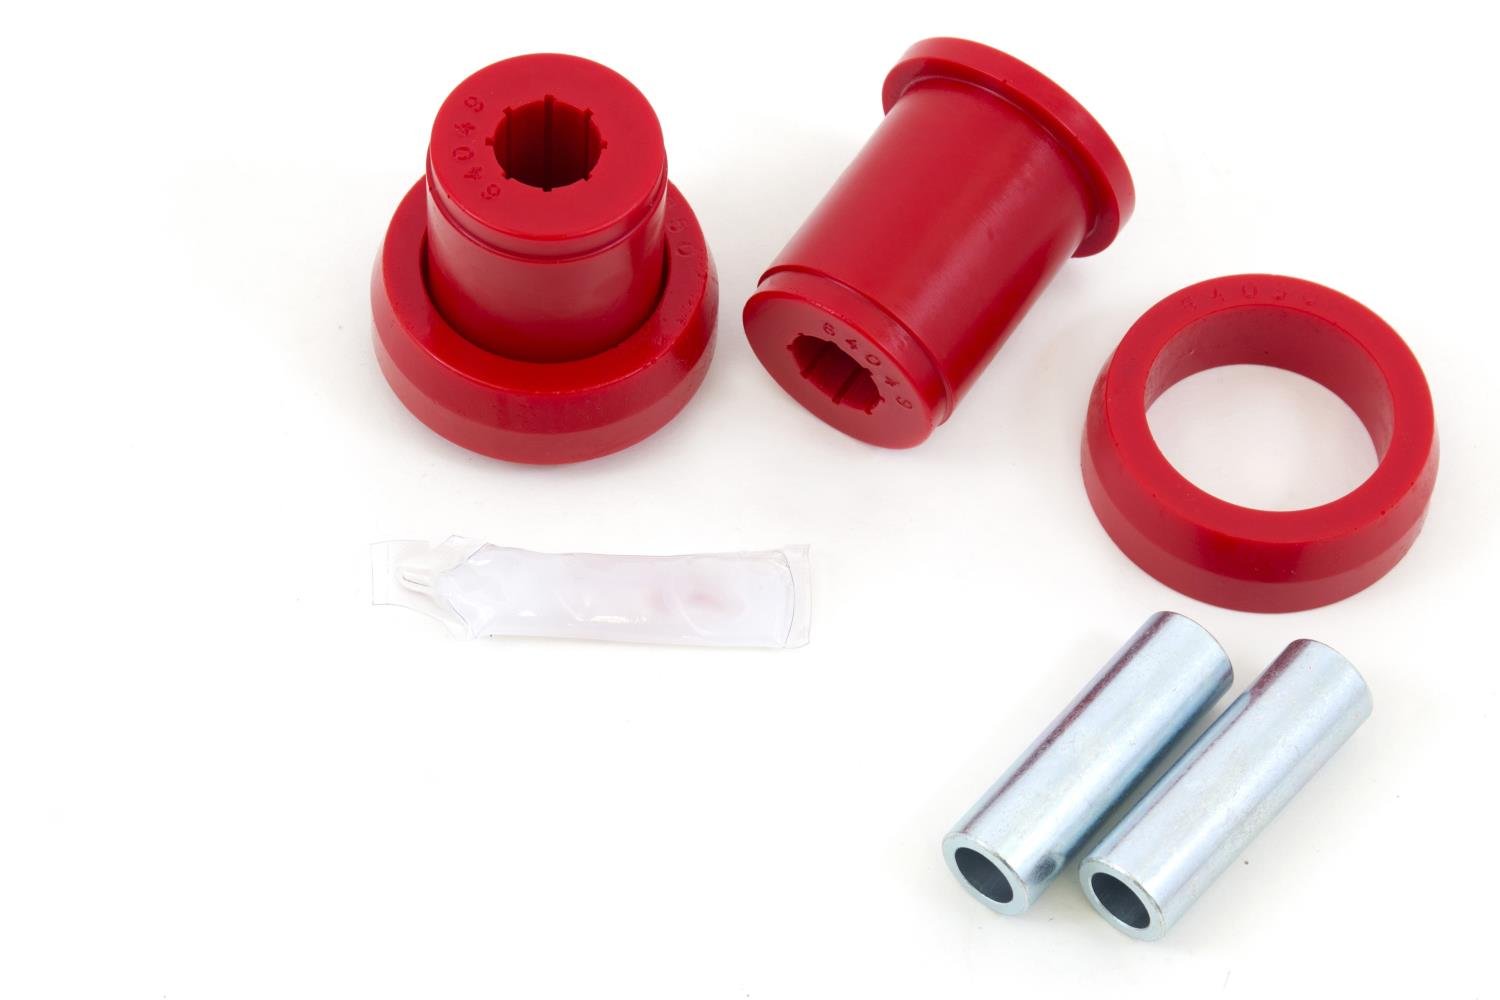 Replace the rubber factory rear end housing bushings with a polyurethane setup from UMI. Over time r